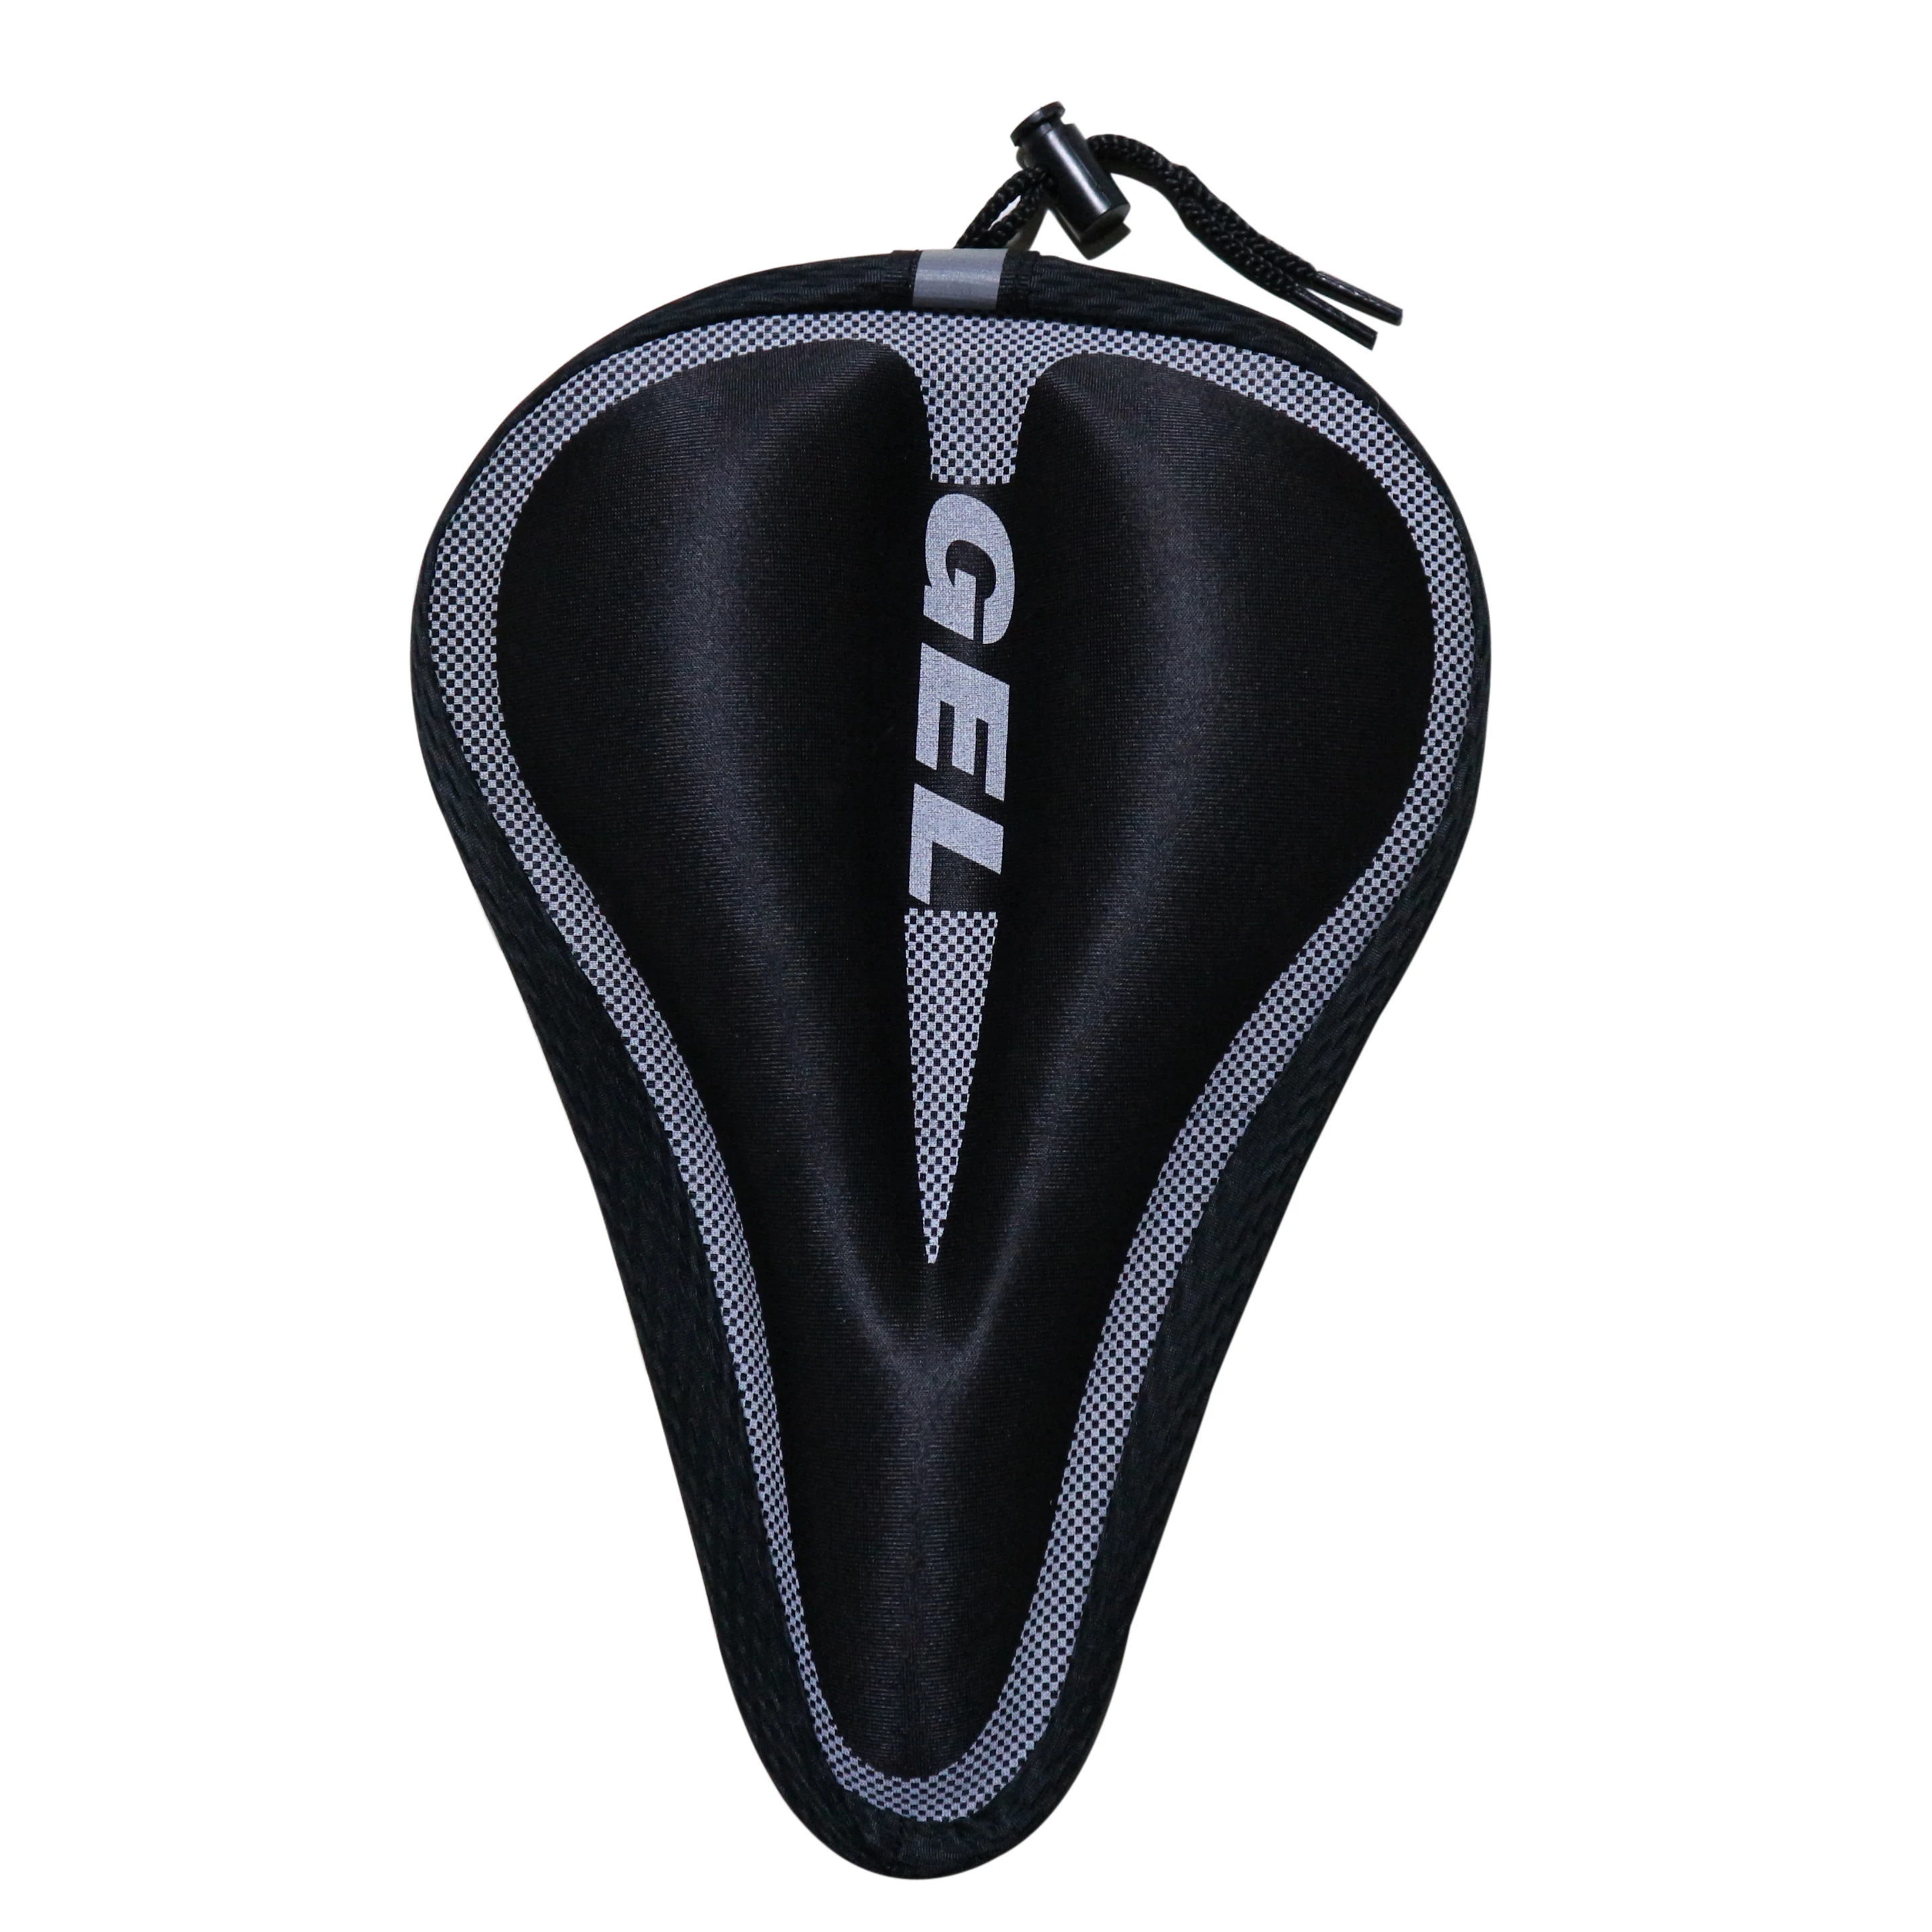 spin bike padded seat cover